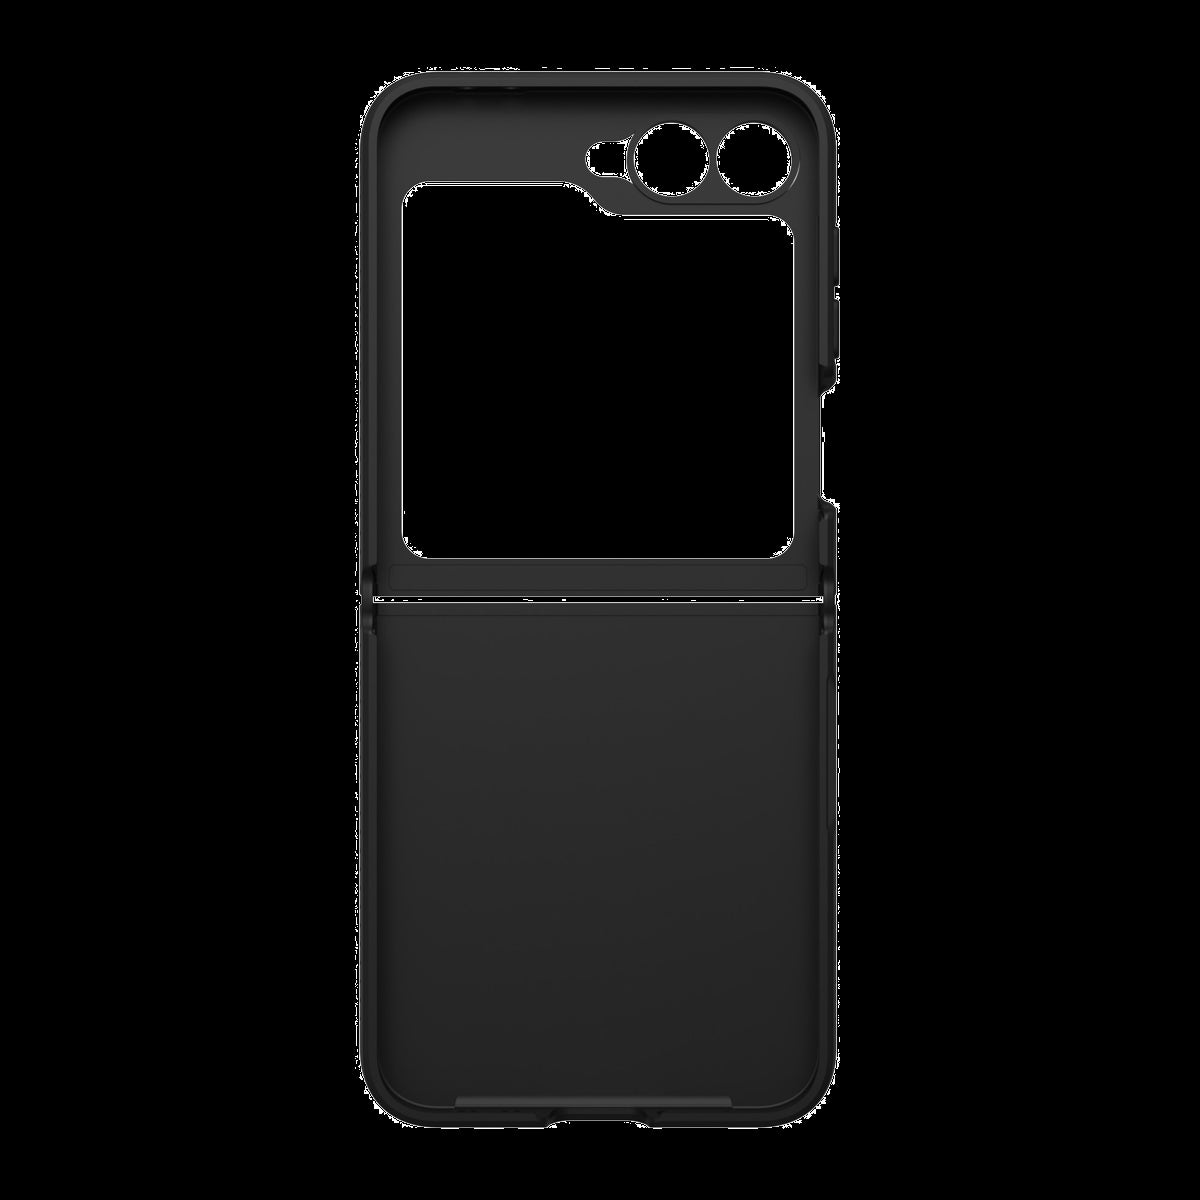 Designed for foldable phones, ZAGG’s Bridgetown case offers lightweight drop protection strengthened with Graphene, one of the strongest material on Earth.